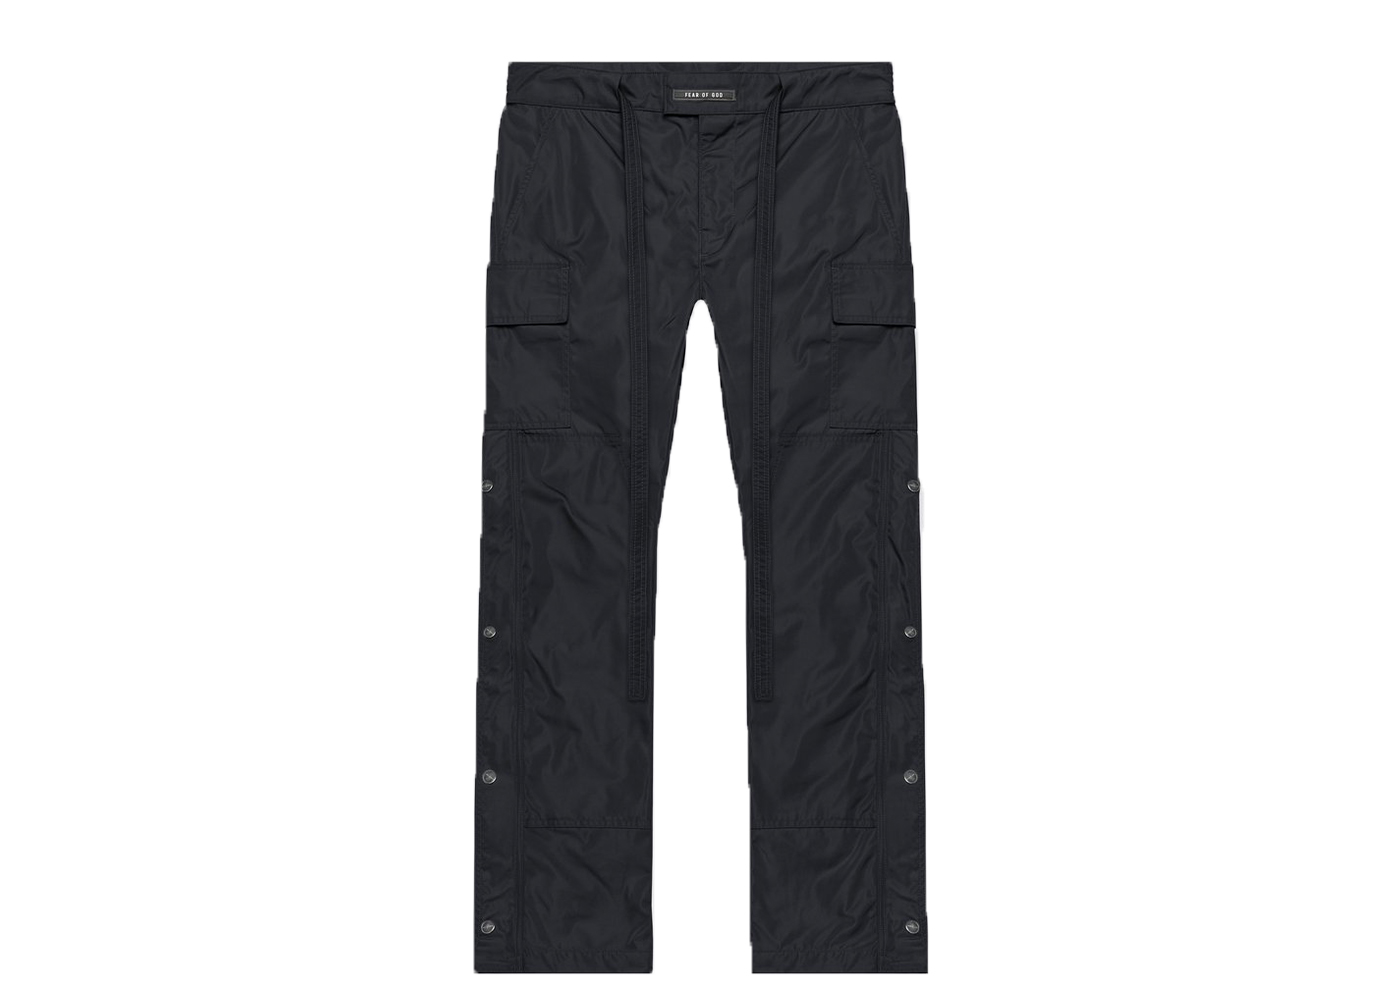 FEAR OF GOD Nylon Cargo Pants Navy - Sixth Collection - US